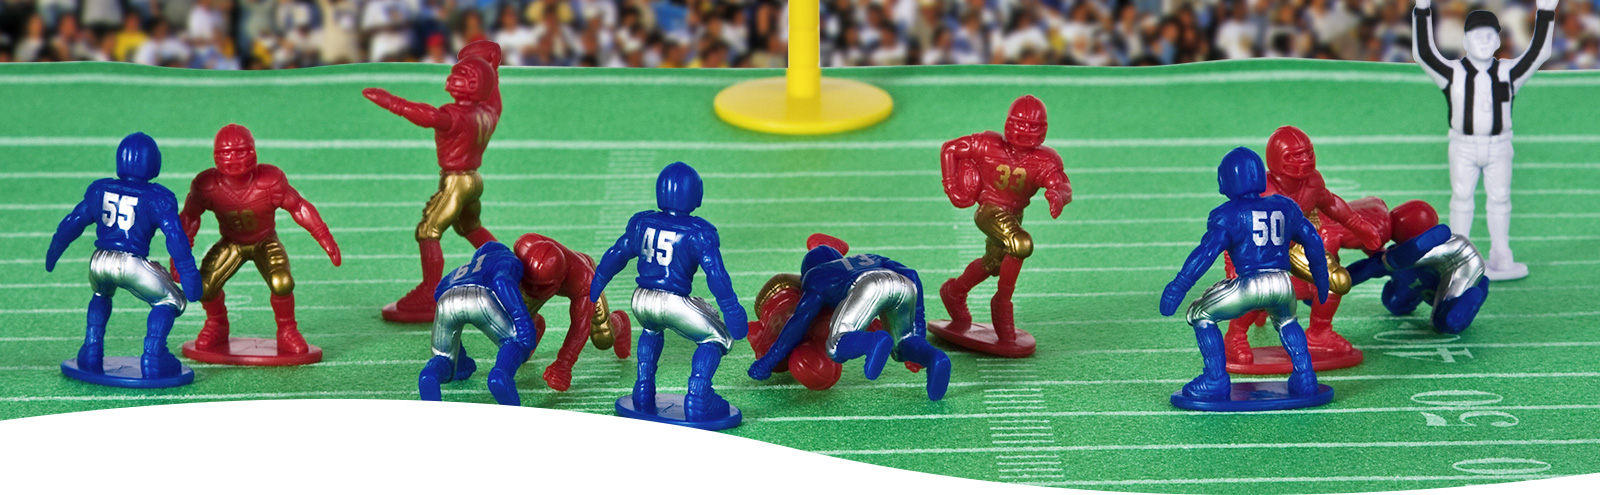 Football Action Figures